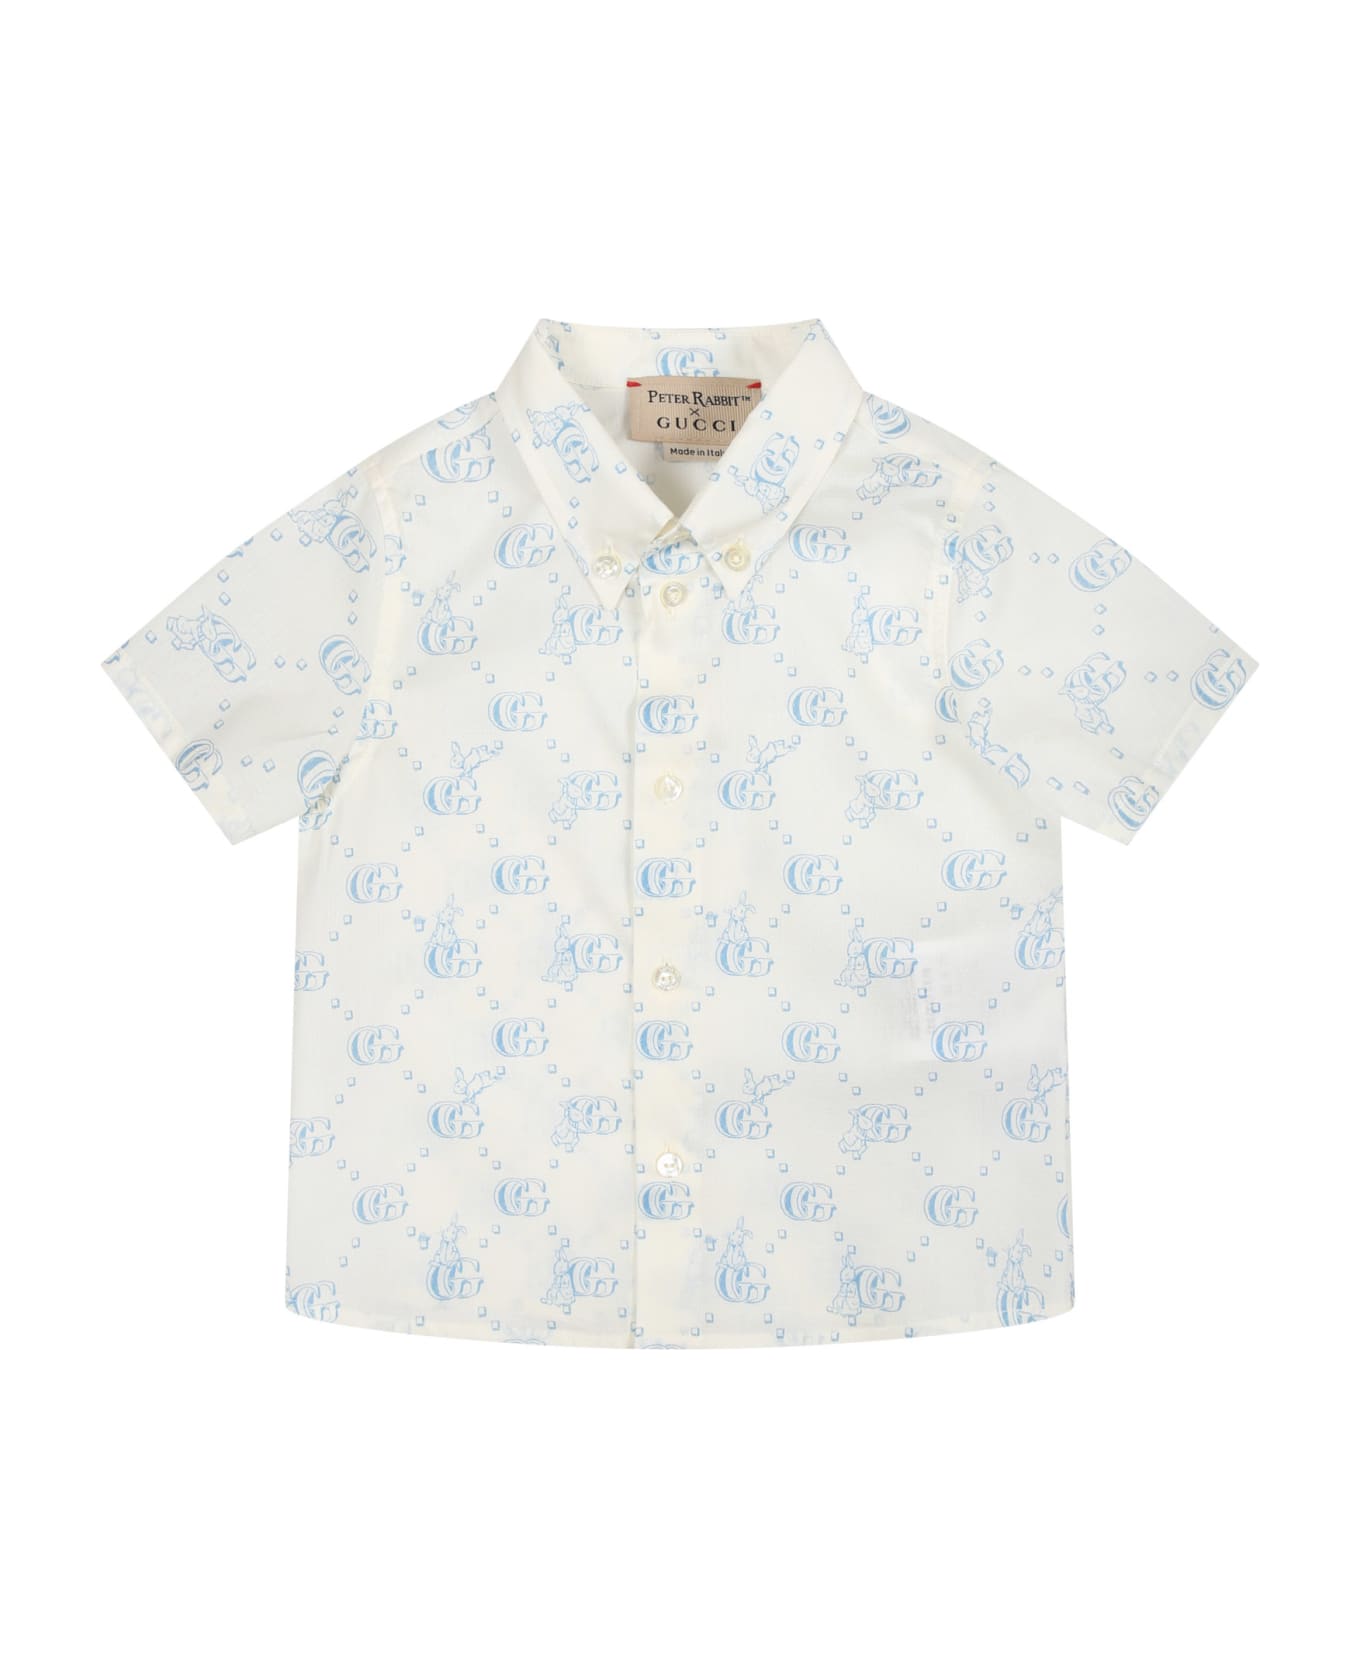 Gucci White Shirt For Baby Girl With Light Blue Gg And Rabbit Logo - White シャツ